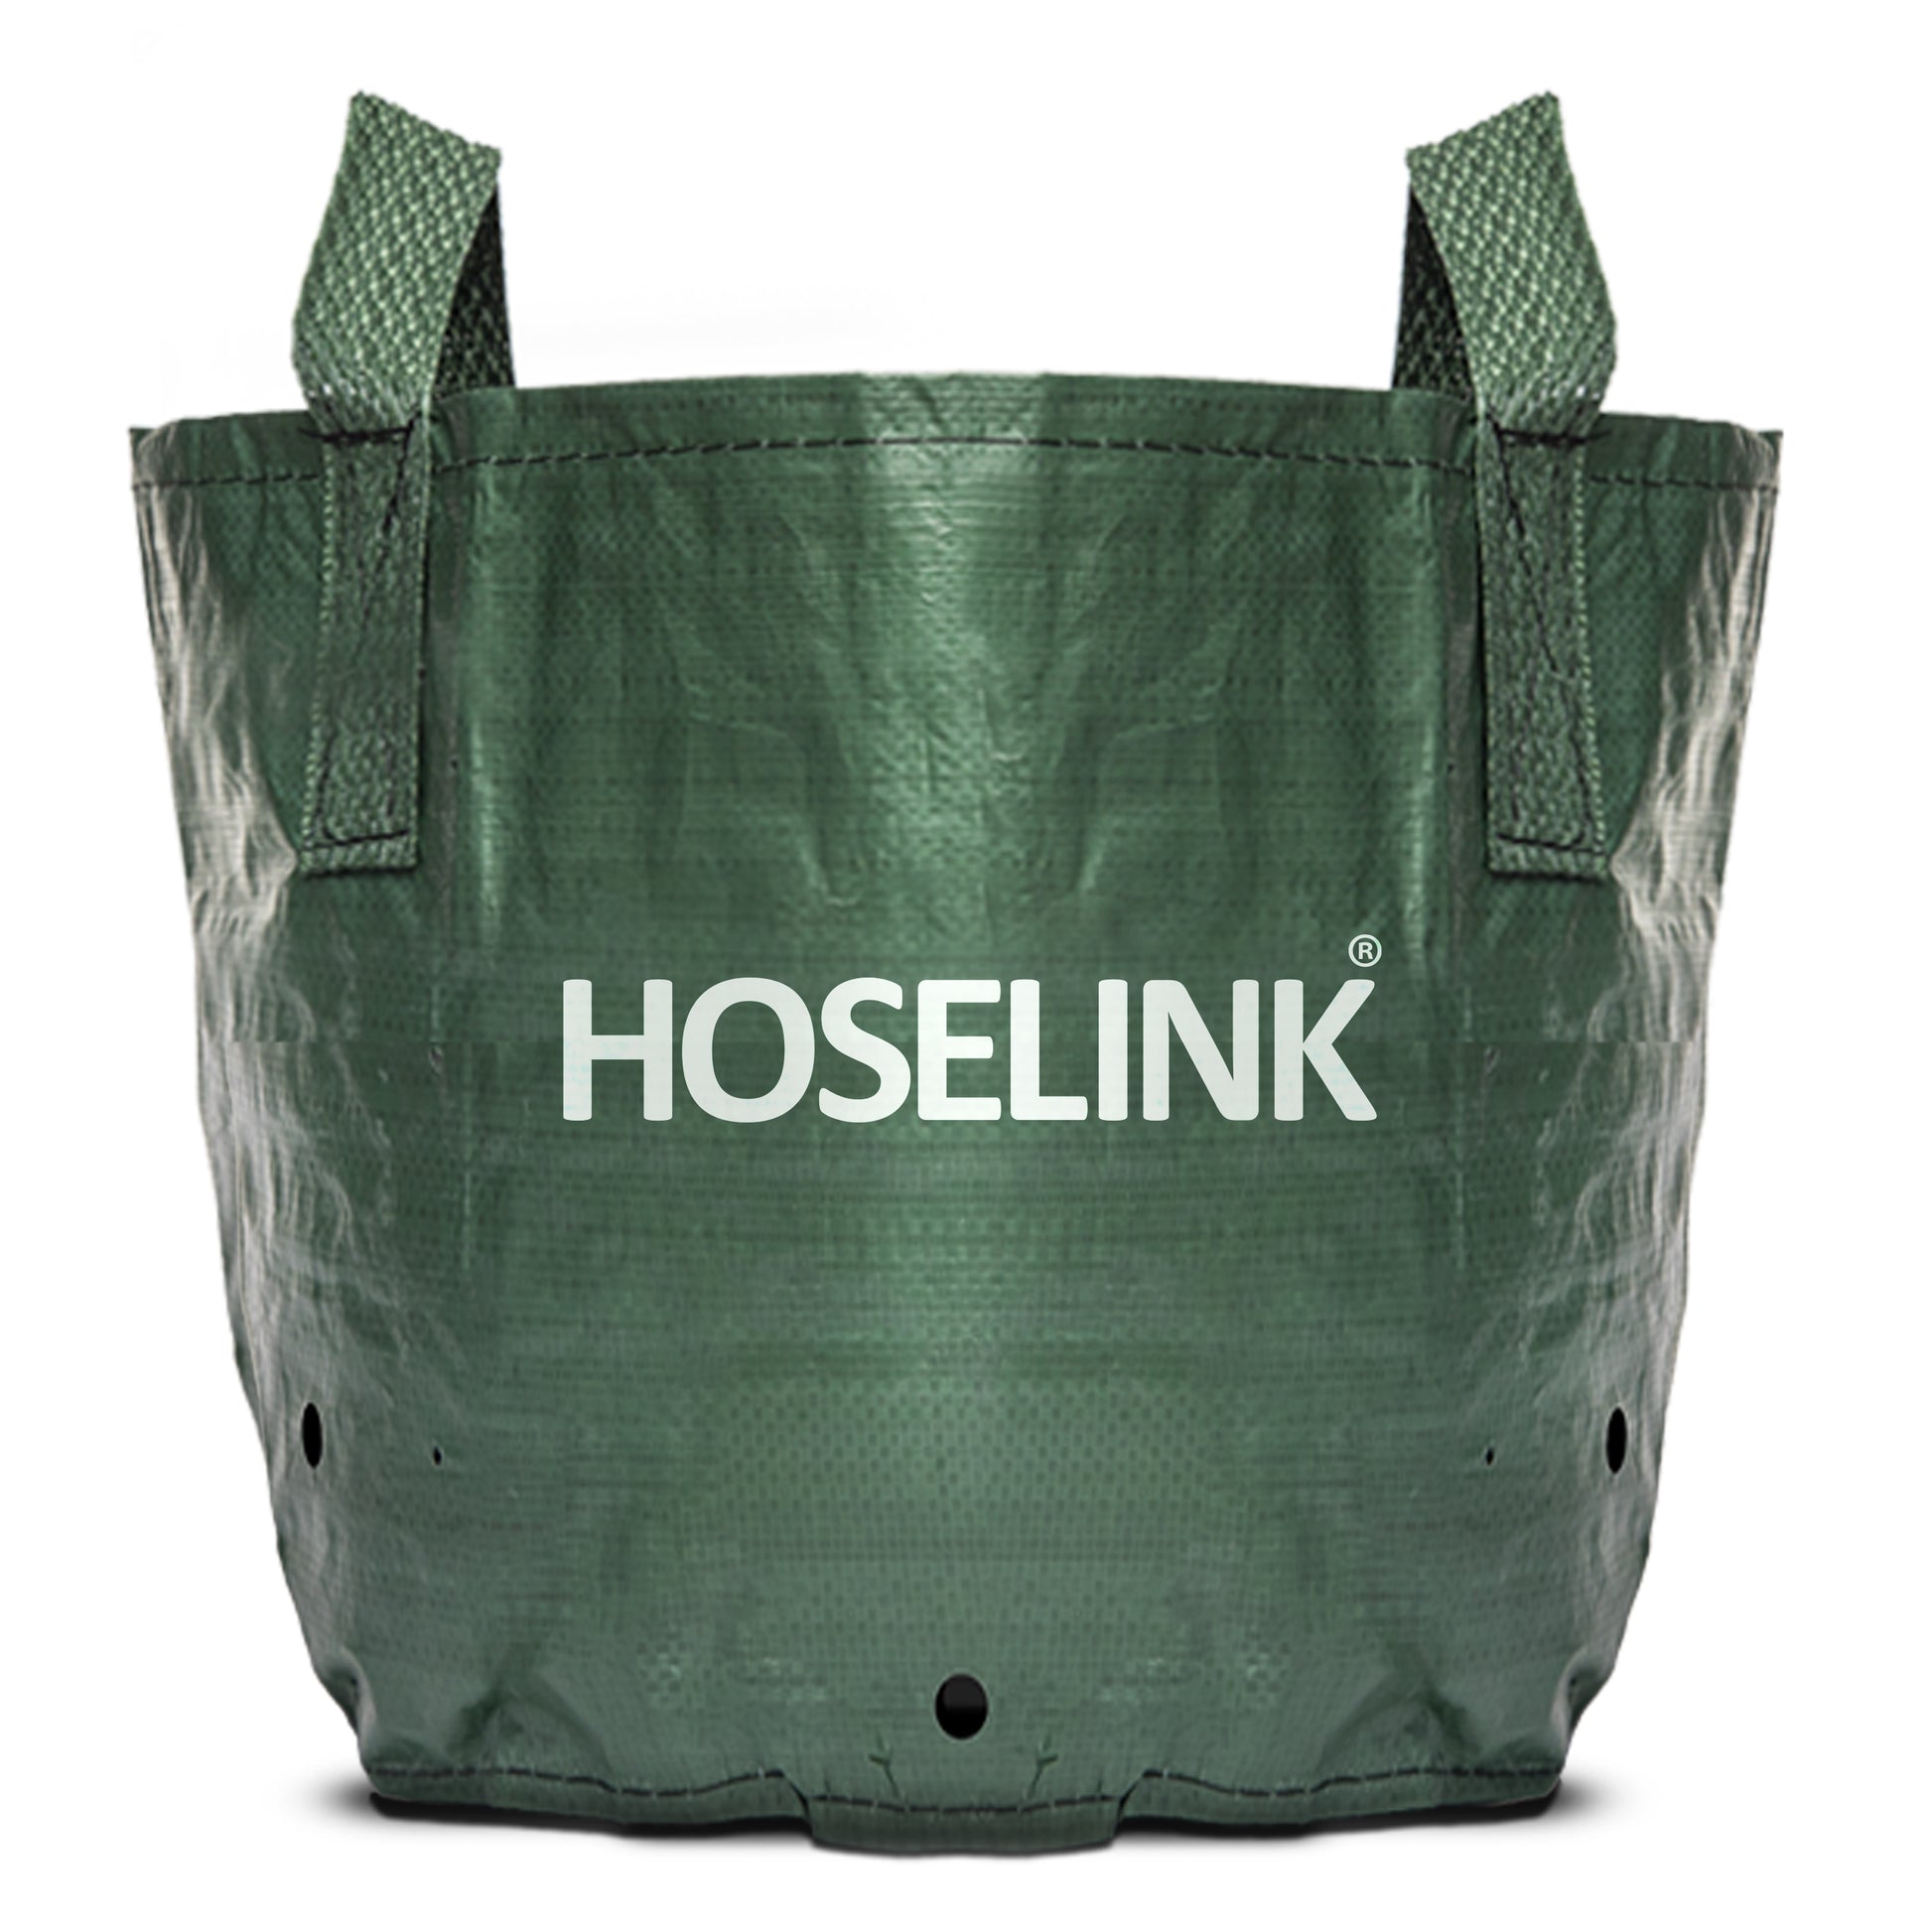 Green 45L Heavy Duty Planter Bag on a white background